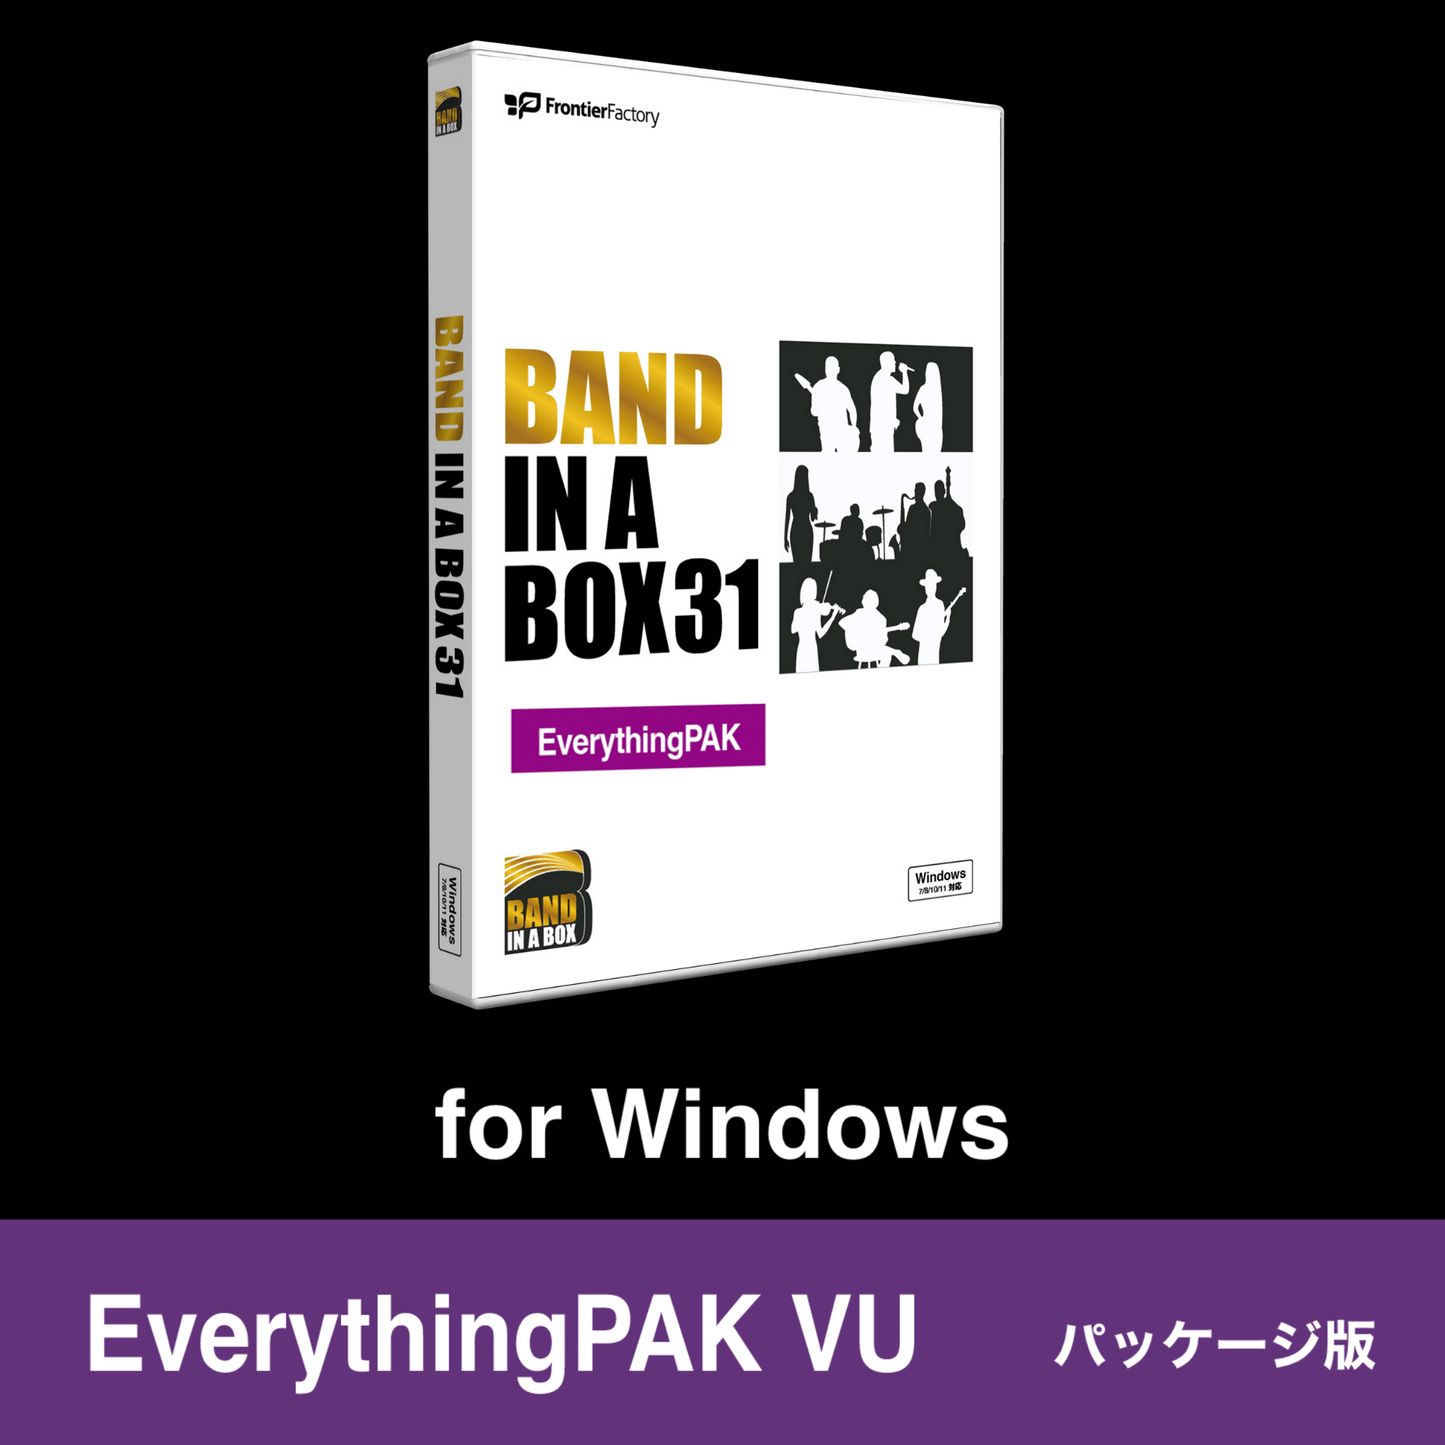 Band-in-a-Box 31 for Win バージョンアップ【パッケージ版】